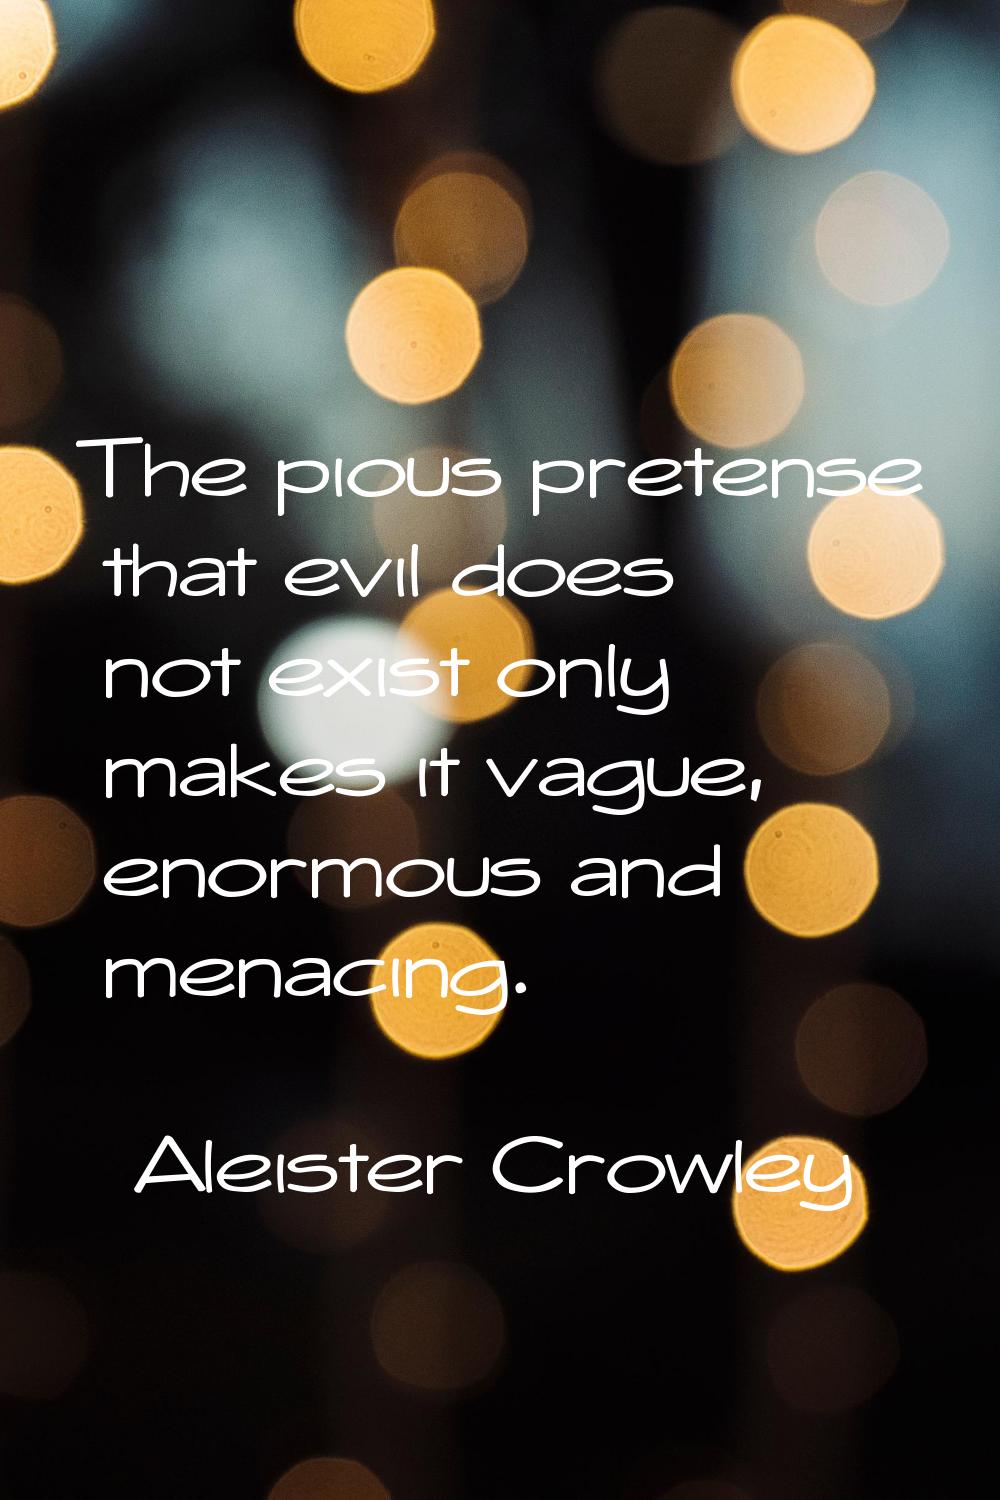 The pious pretense that evil does not exist only makes it vague, enormous and menacing.